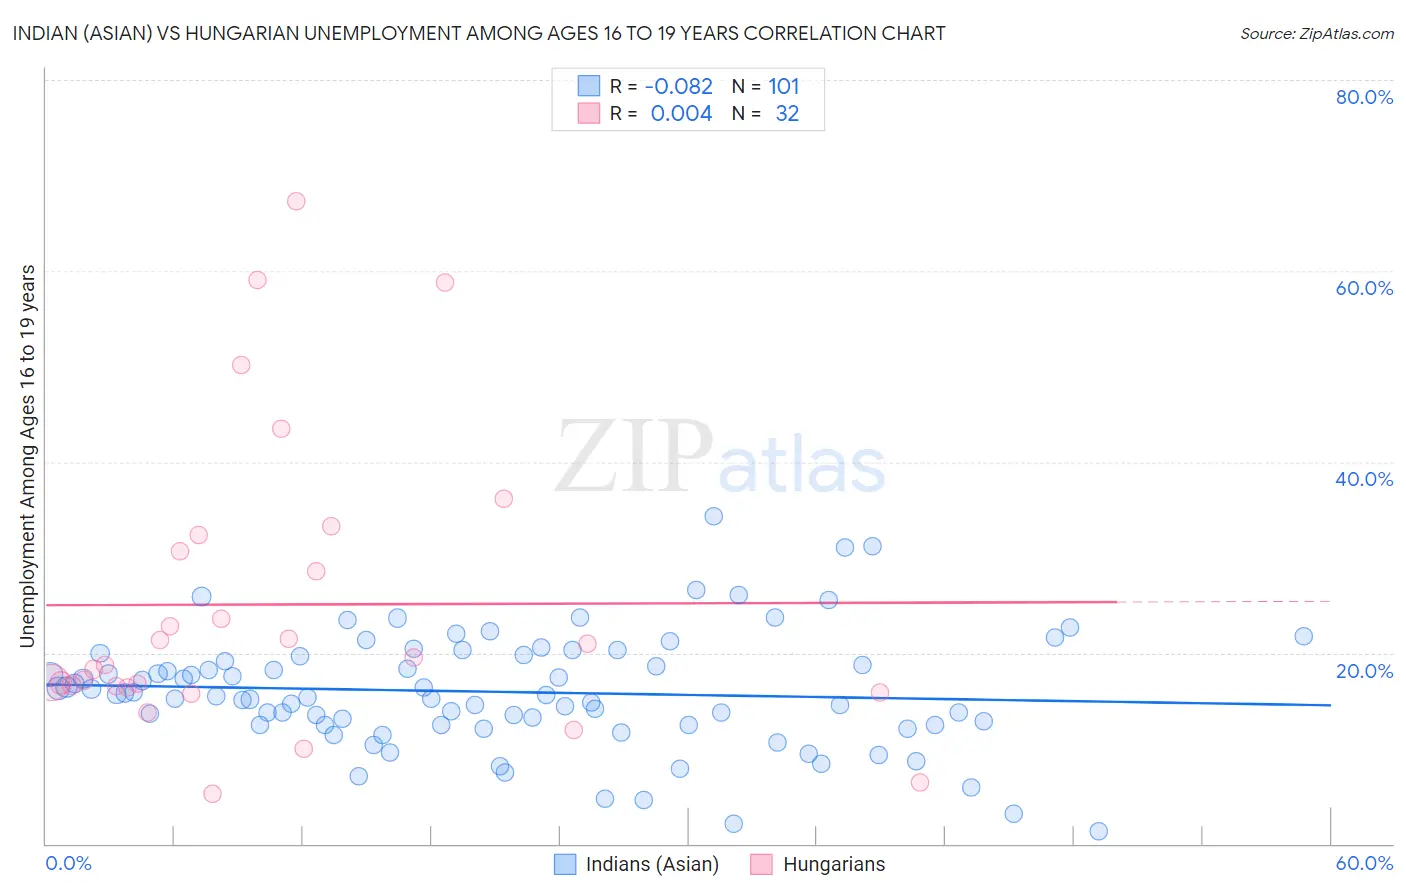 Indian (Asian) vs Hungarian Unemployment Among Ages 16 to 19 years